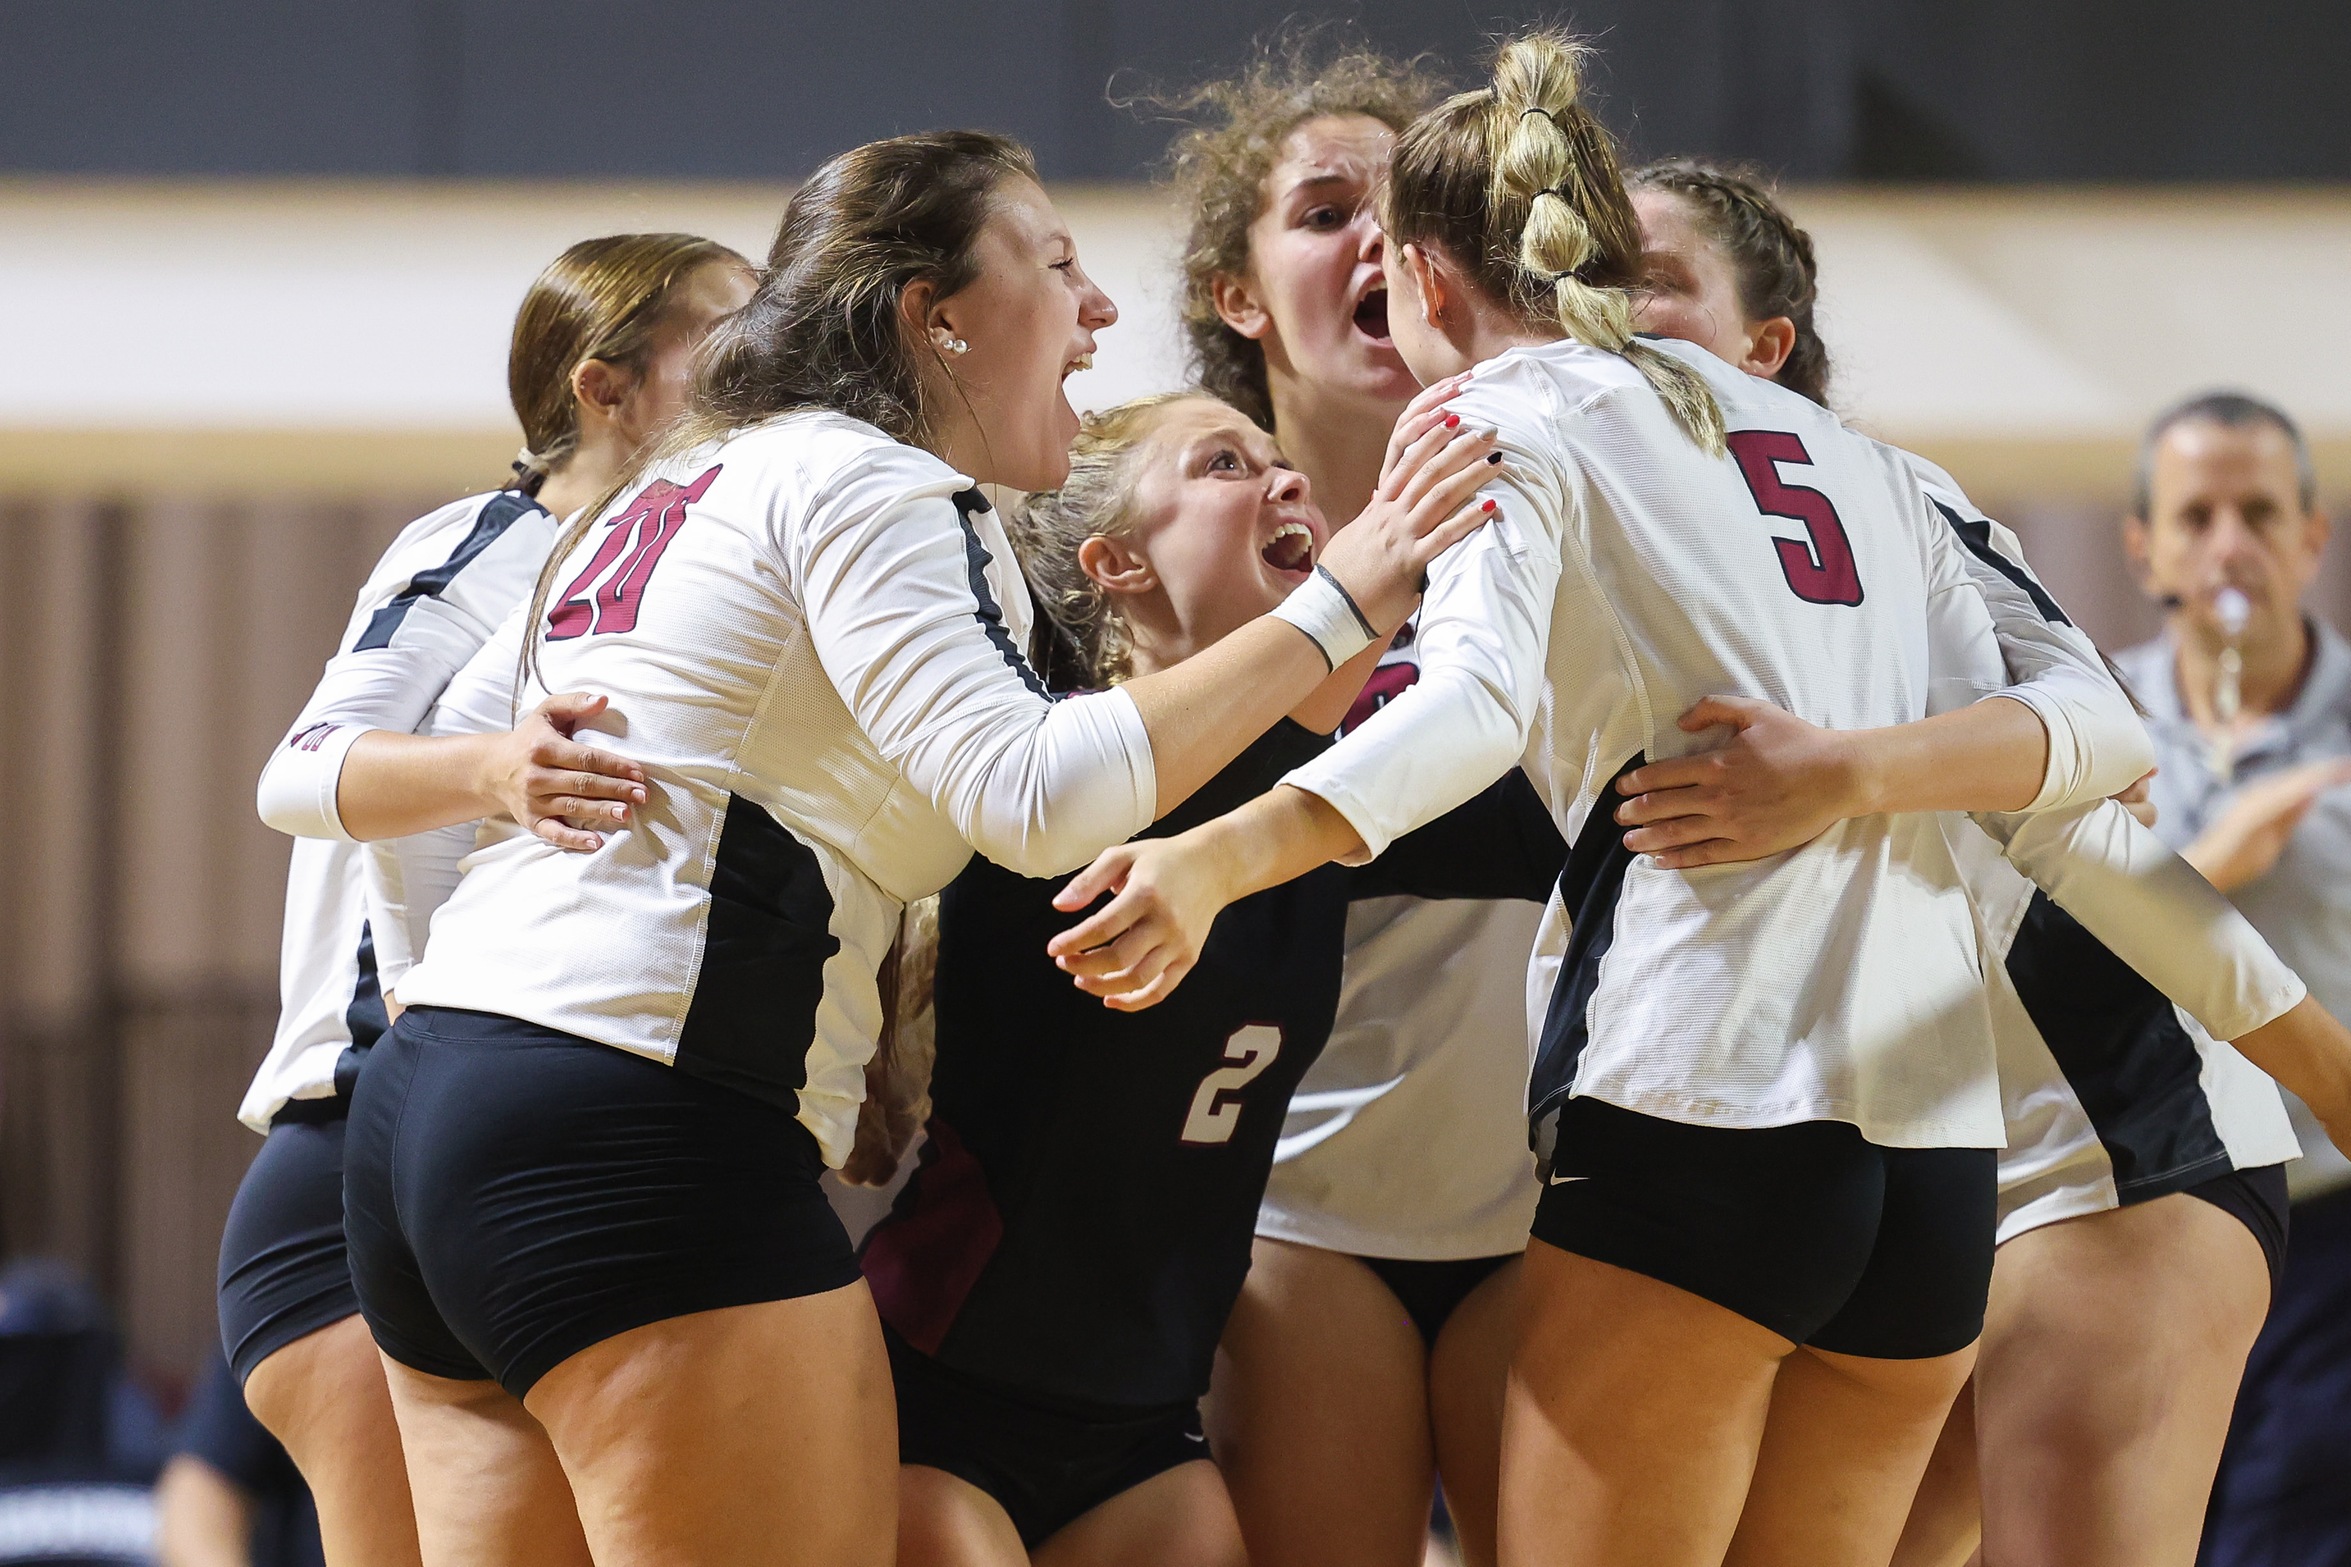 Draper Collects Sixth Double-Double in Maroons' 3-2 Win Over Quakers